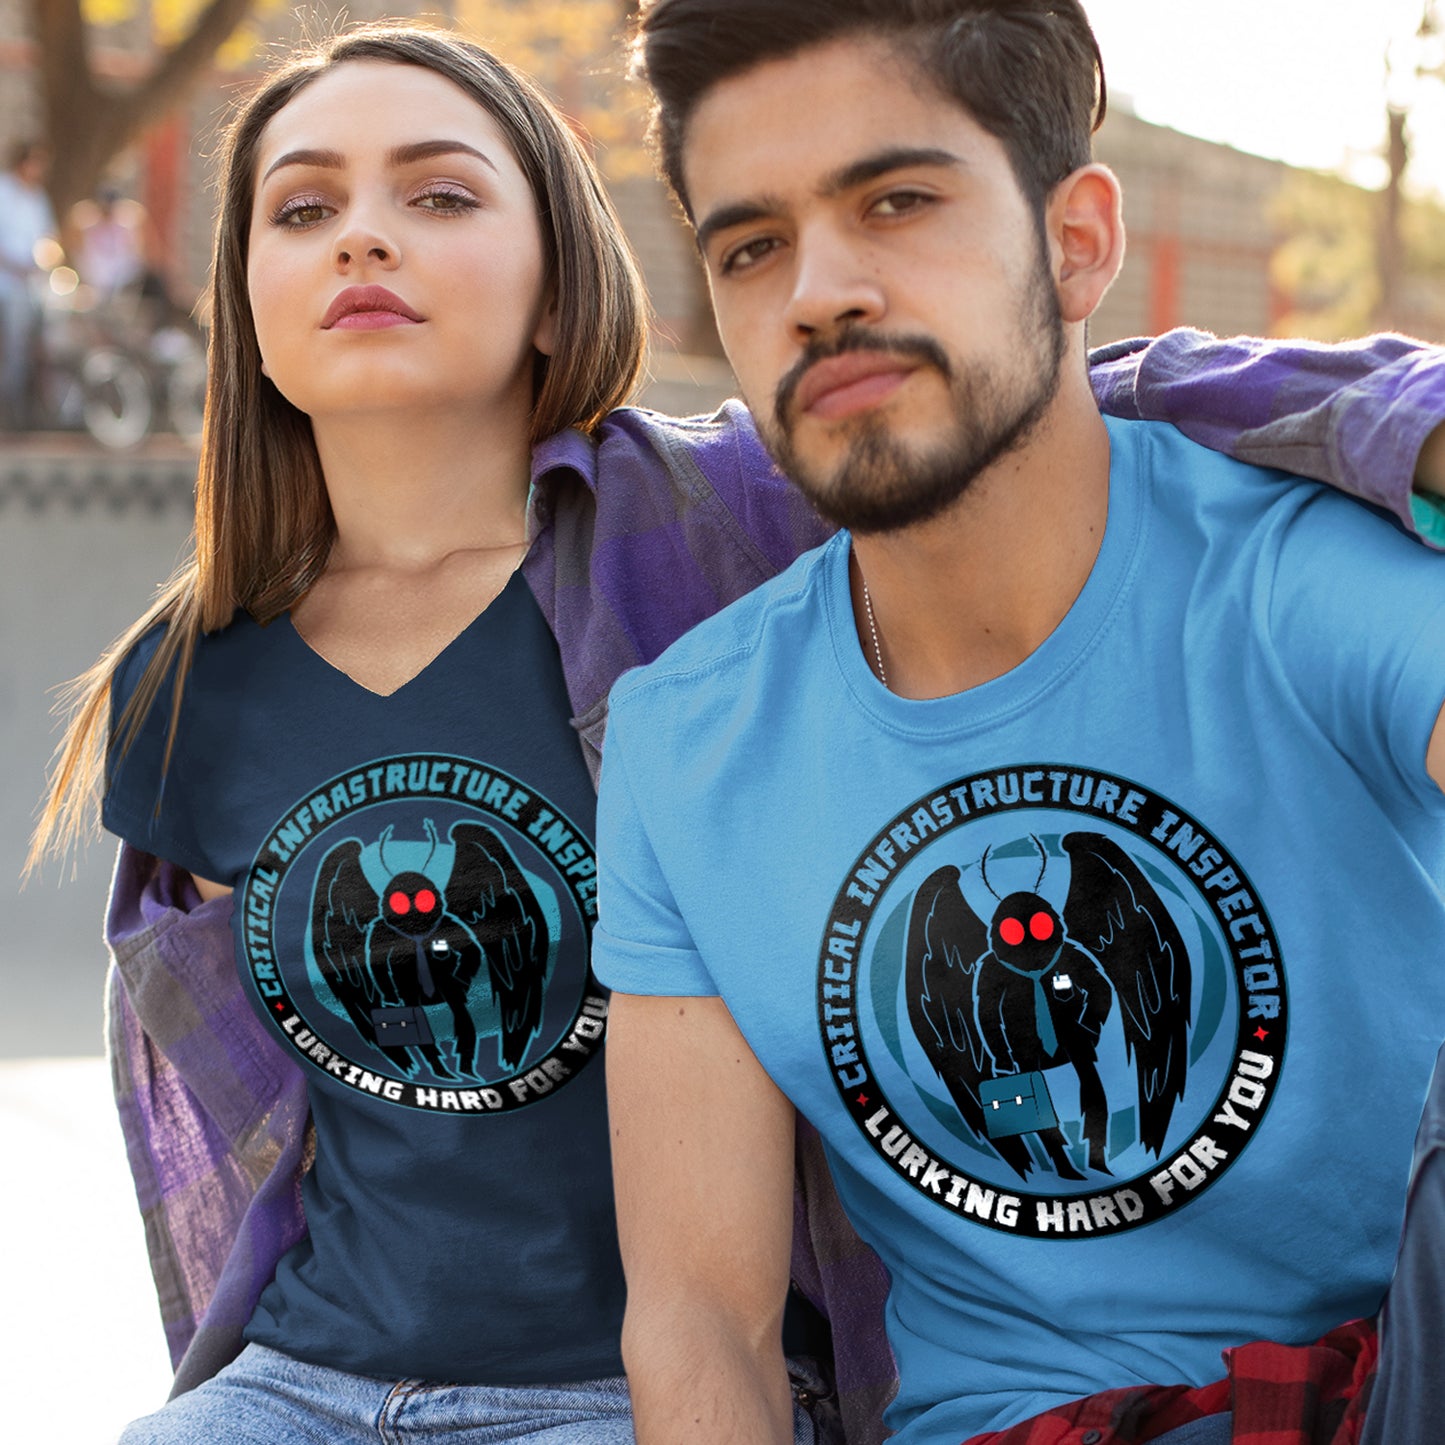 A female model in a navy blue T-shirt and a male model in a light blue T-shirt. Each tee has a black ring/circle printed with the words "Critical infrastructure inspector" in dark blue and "Working hard for you" in white. Within the ring is a black cartoon Mothman with red eyes, a navy tie, and a navy briefcase set against a lighter shadow